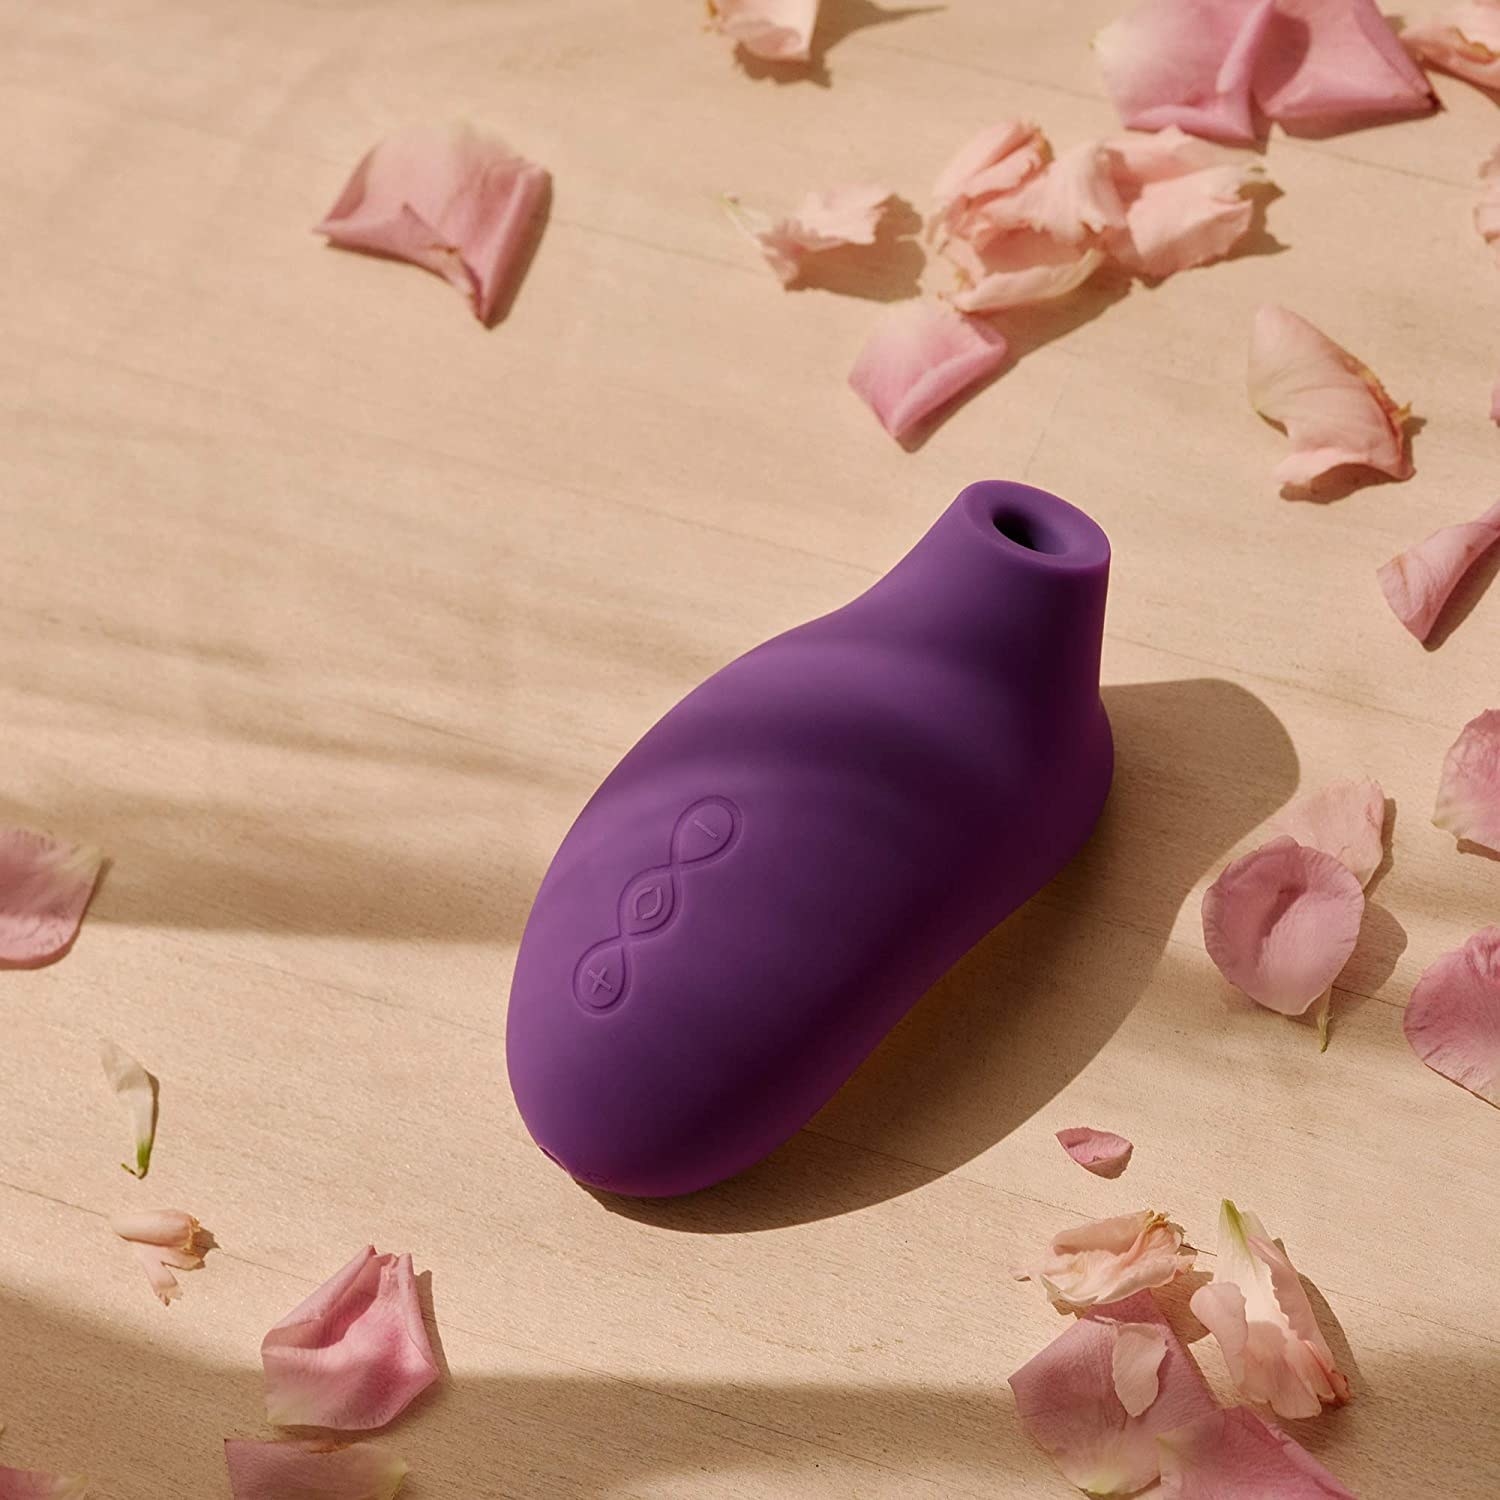 The vibrator surrounded by rose petals